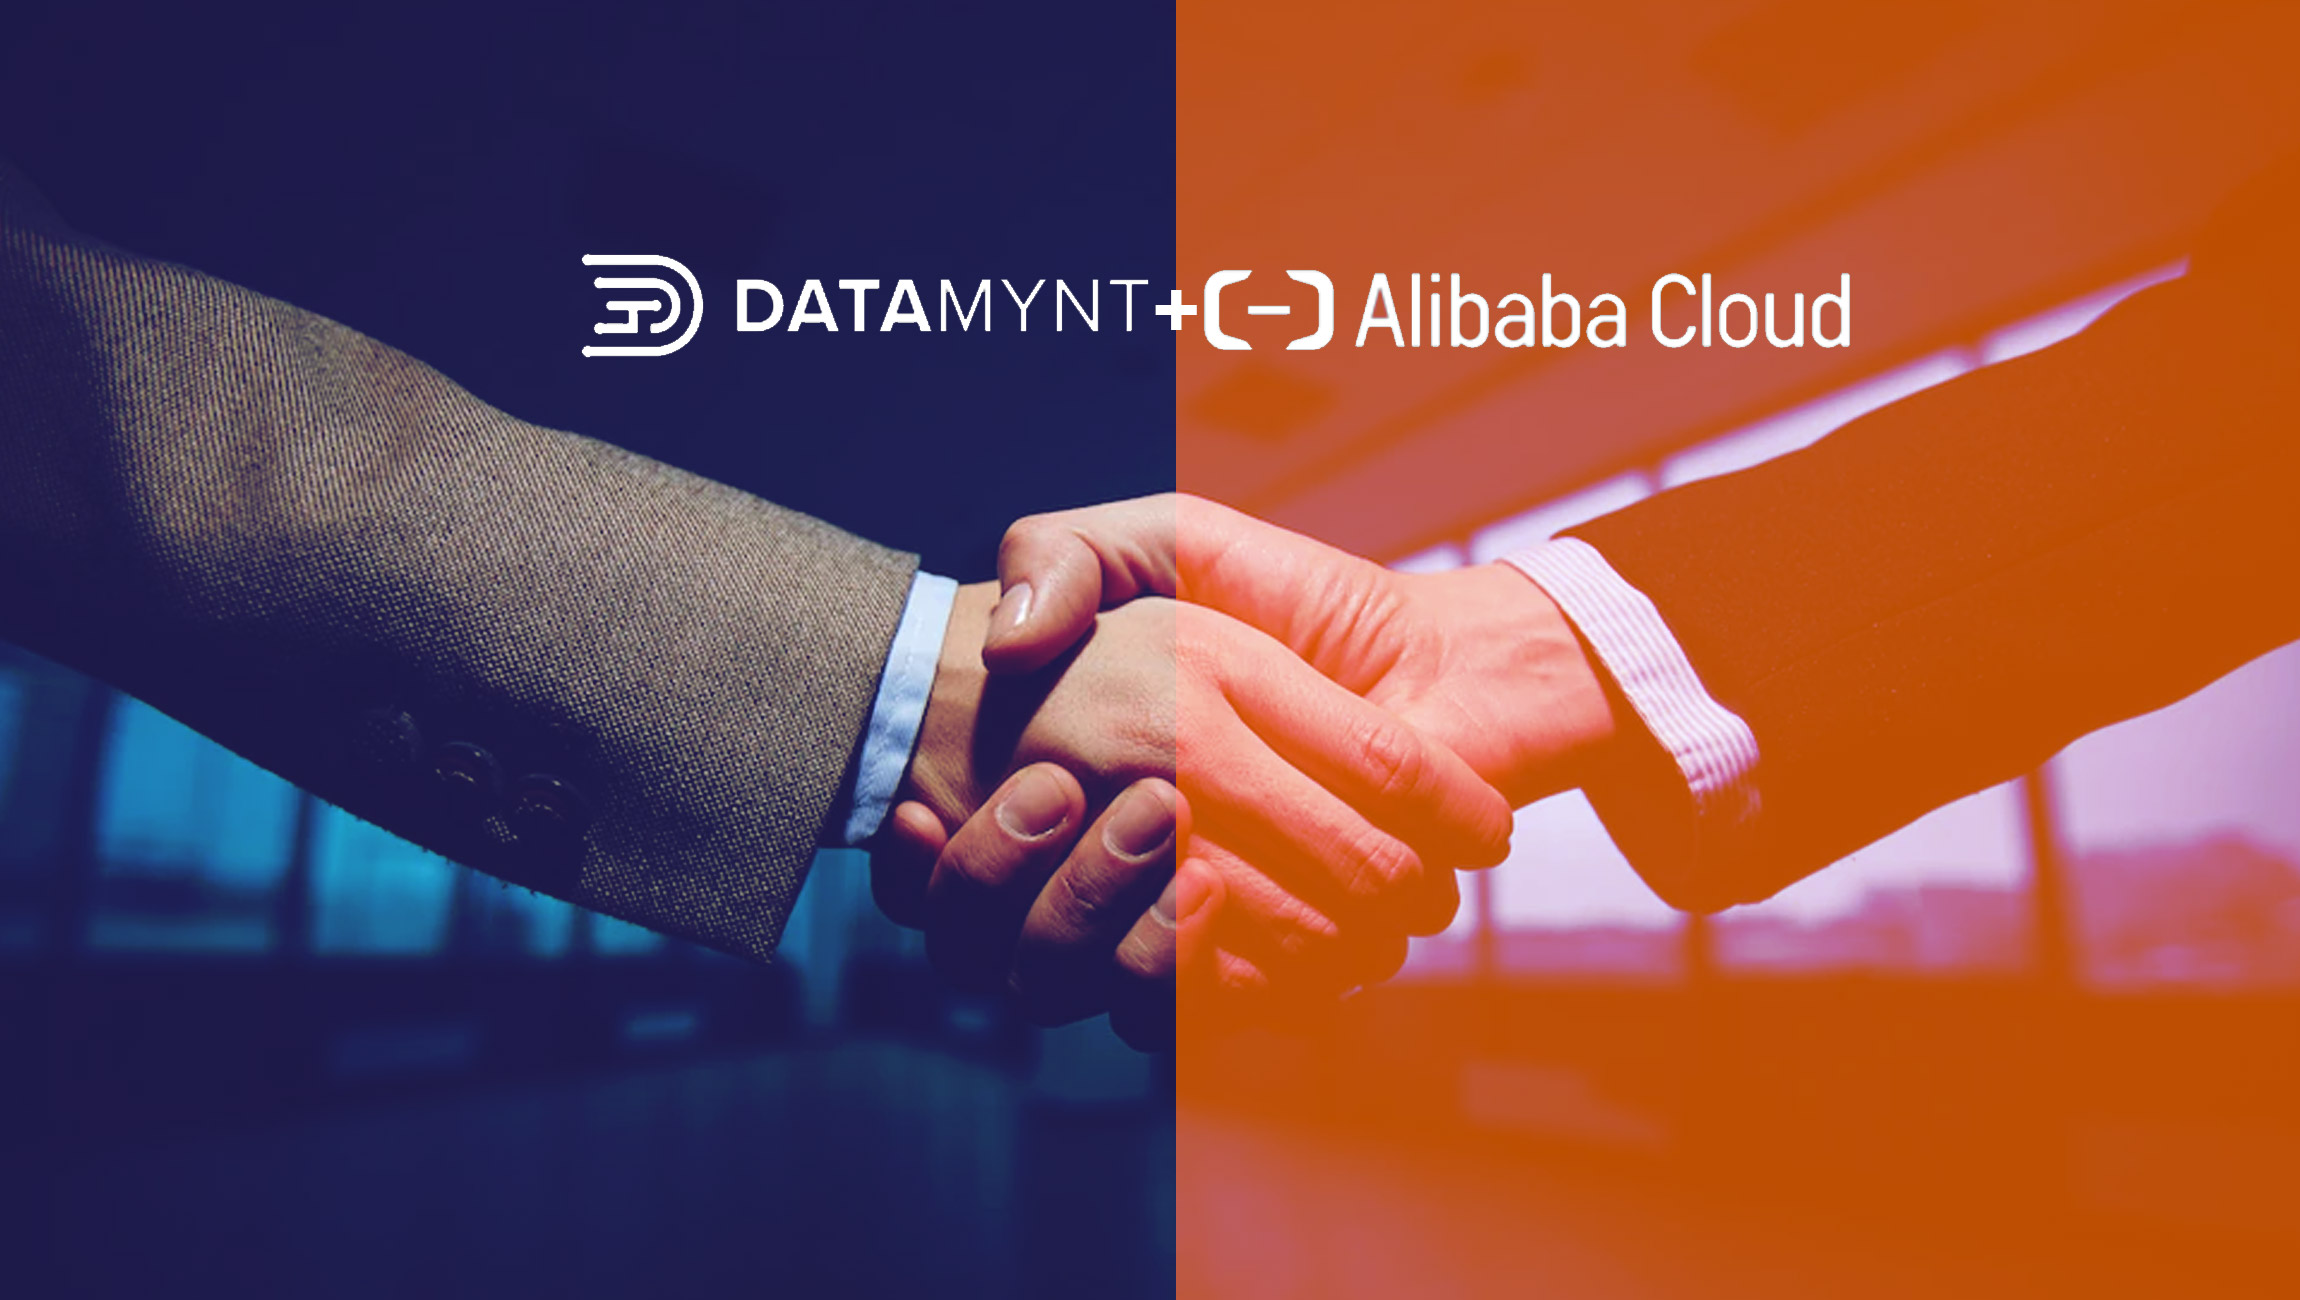 Data Mynt and Alibaba Cloud Announce Partnership to Accelerate Crypto and Cloud Adoption in Africa and Latin America 1